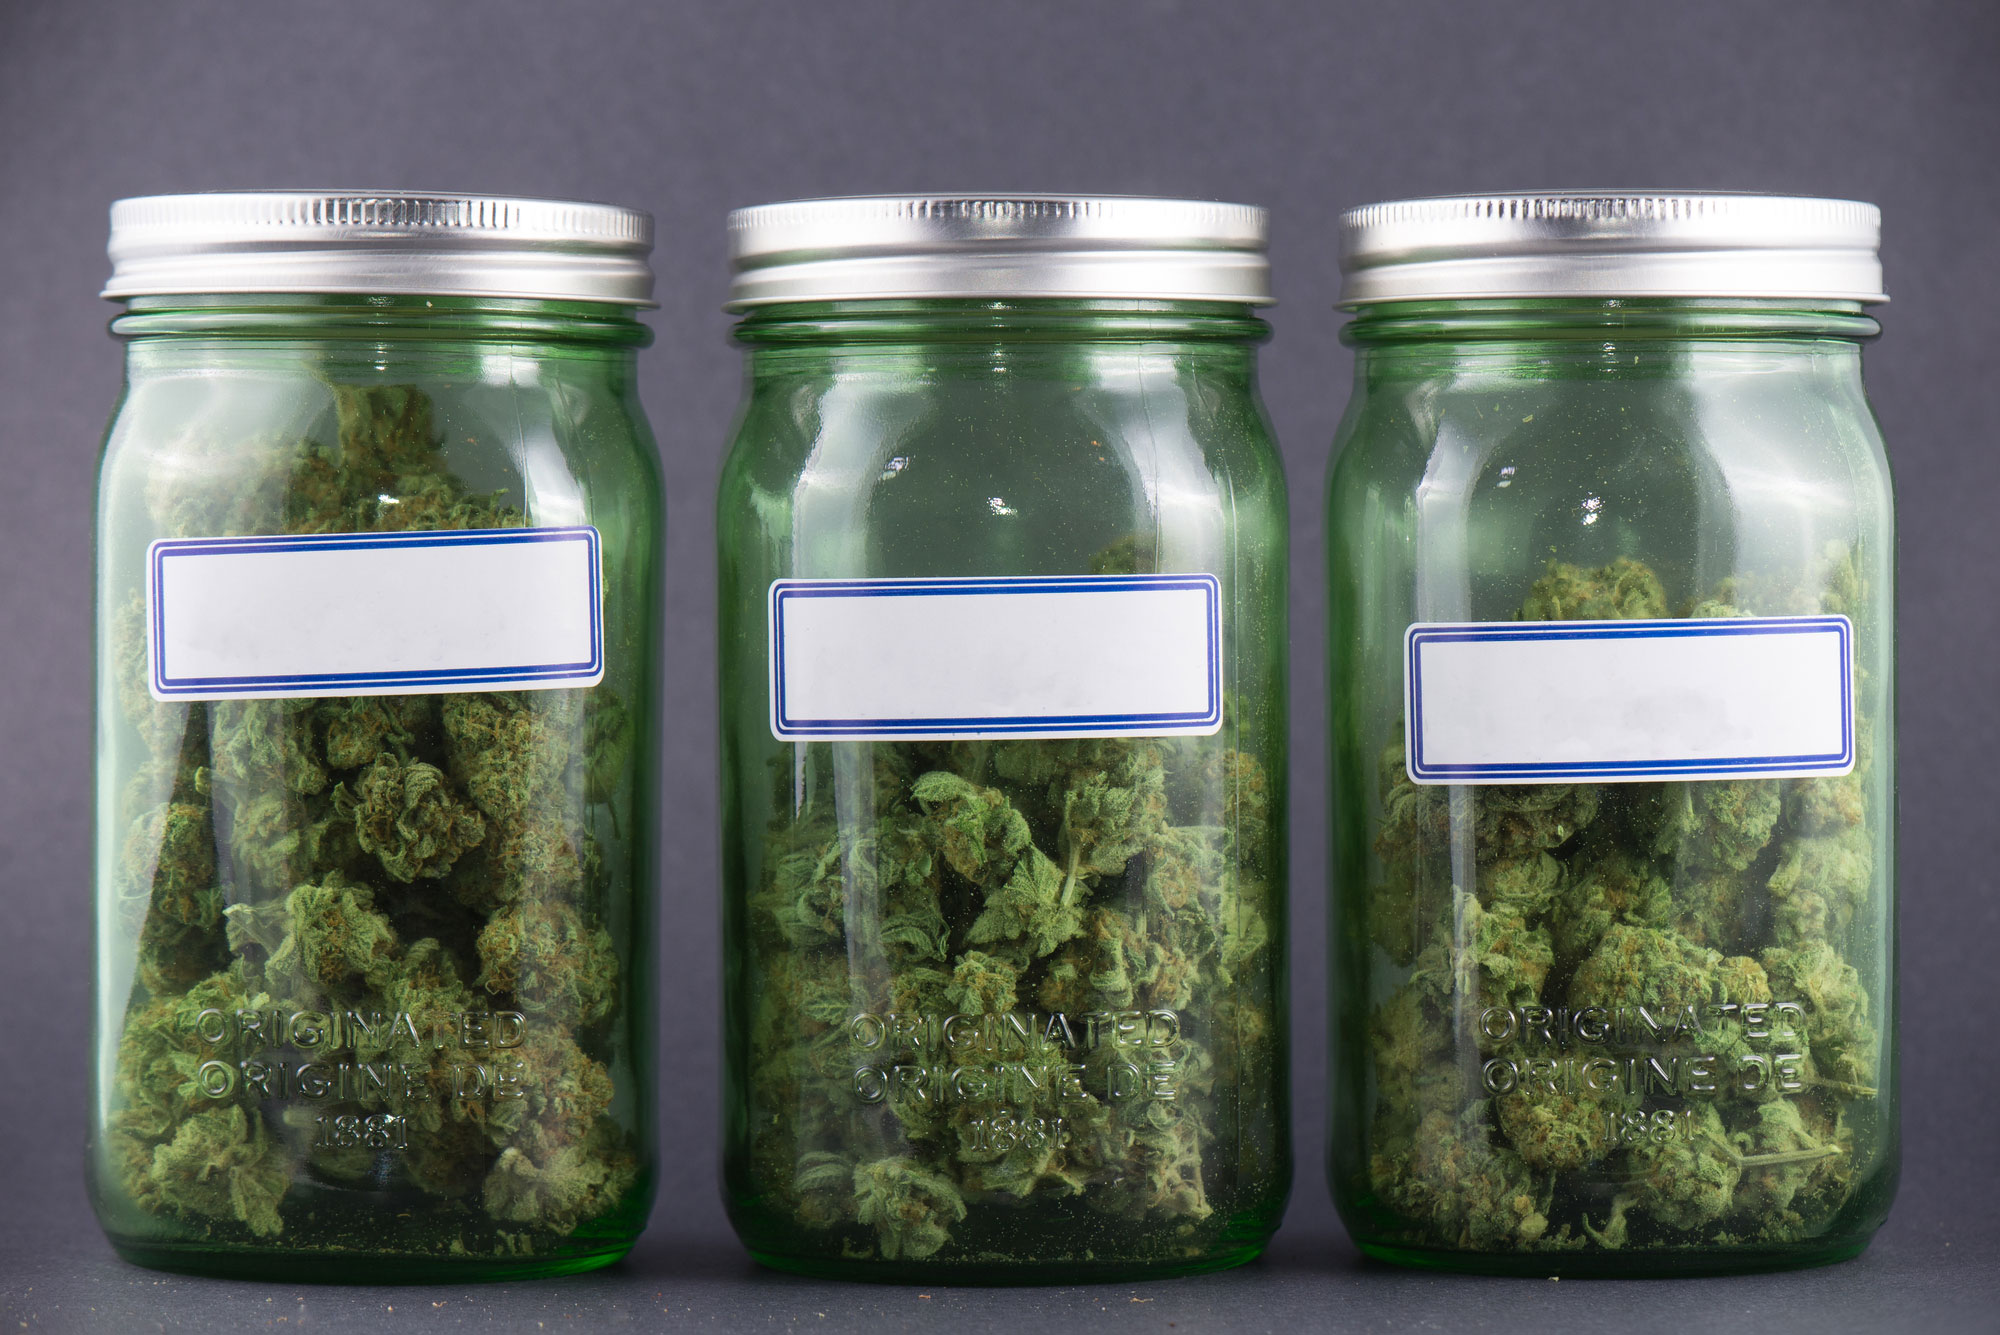 different strains and flowers of marijuana inside a jar